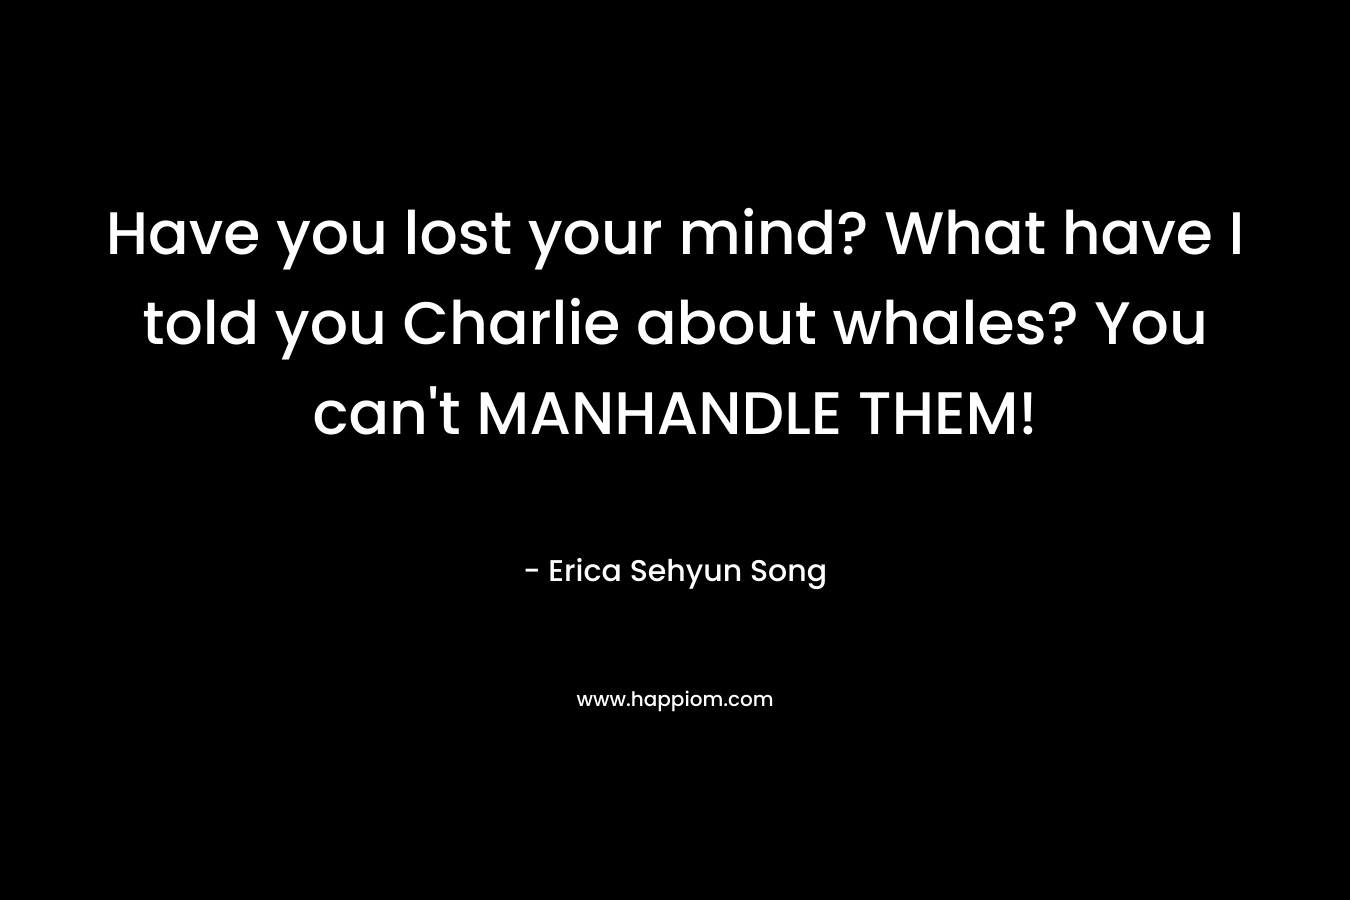 Have you lost your mind? What have I told you Charlie about whales? You can't MANHANDLE THEM!